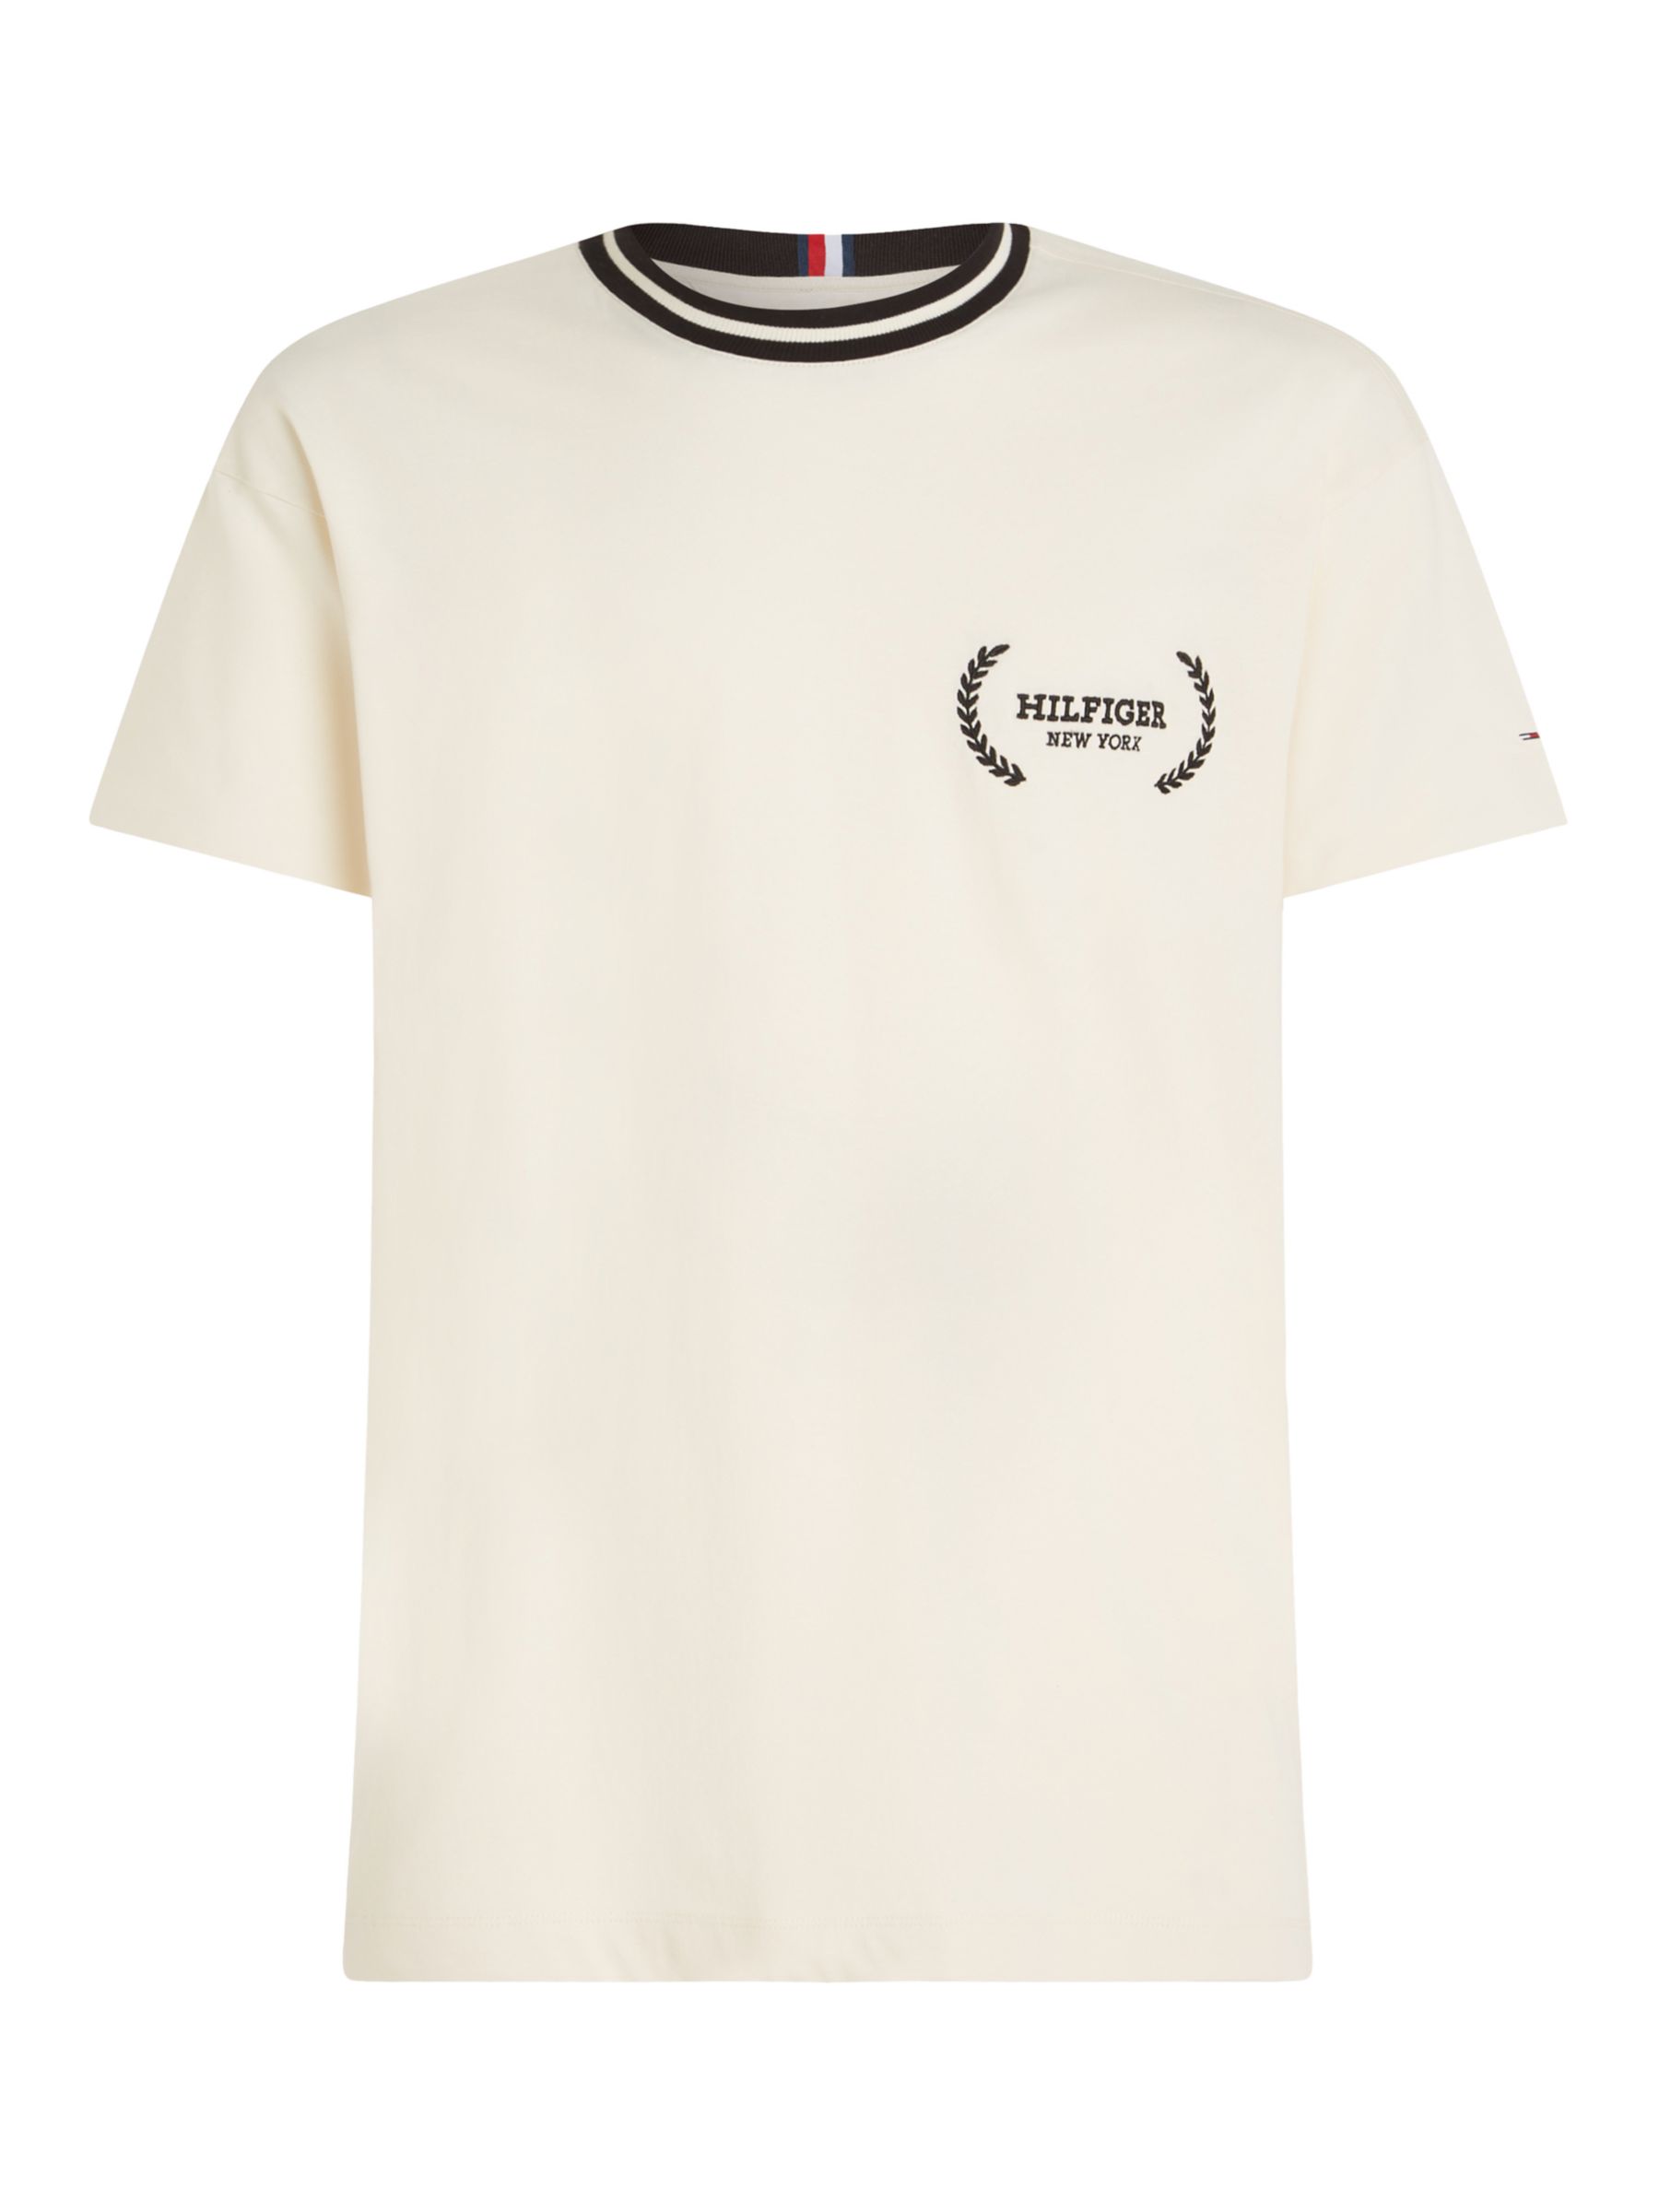 Buy Tommy Hilfiger Tipped Cotton T-Shirt, Calico Online at johnlewis.com